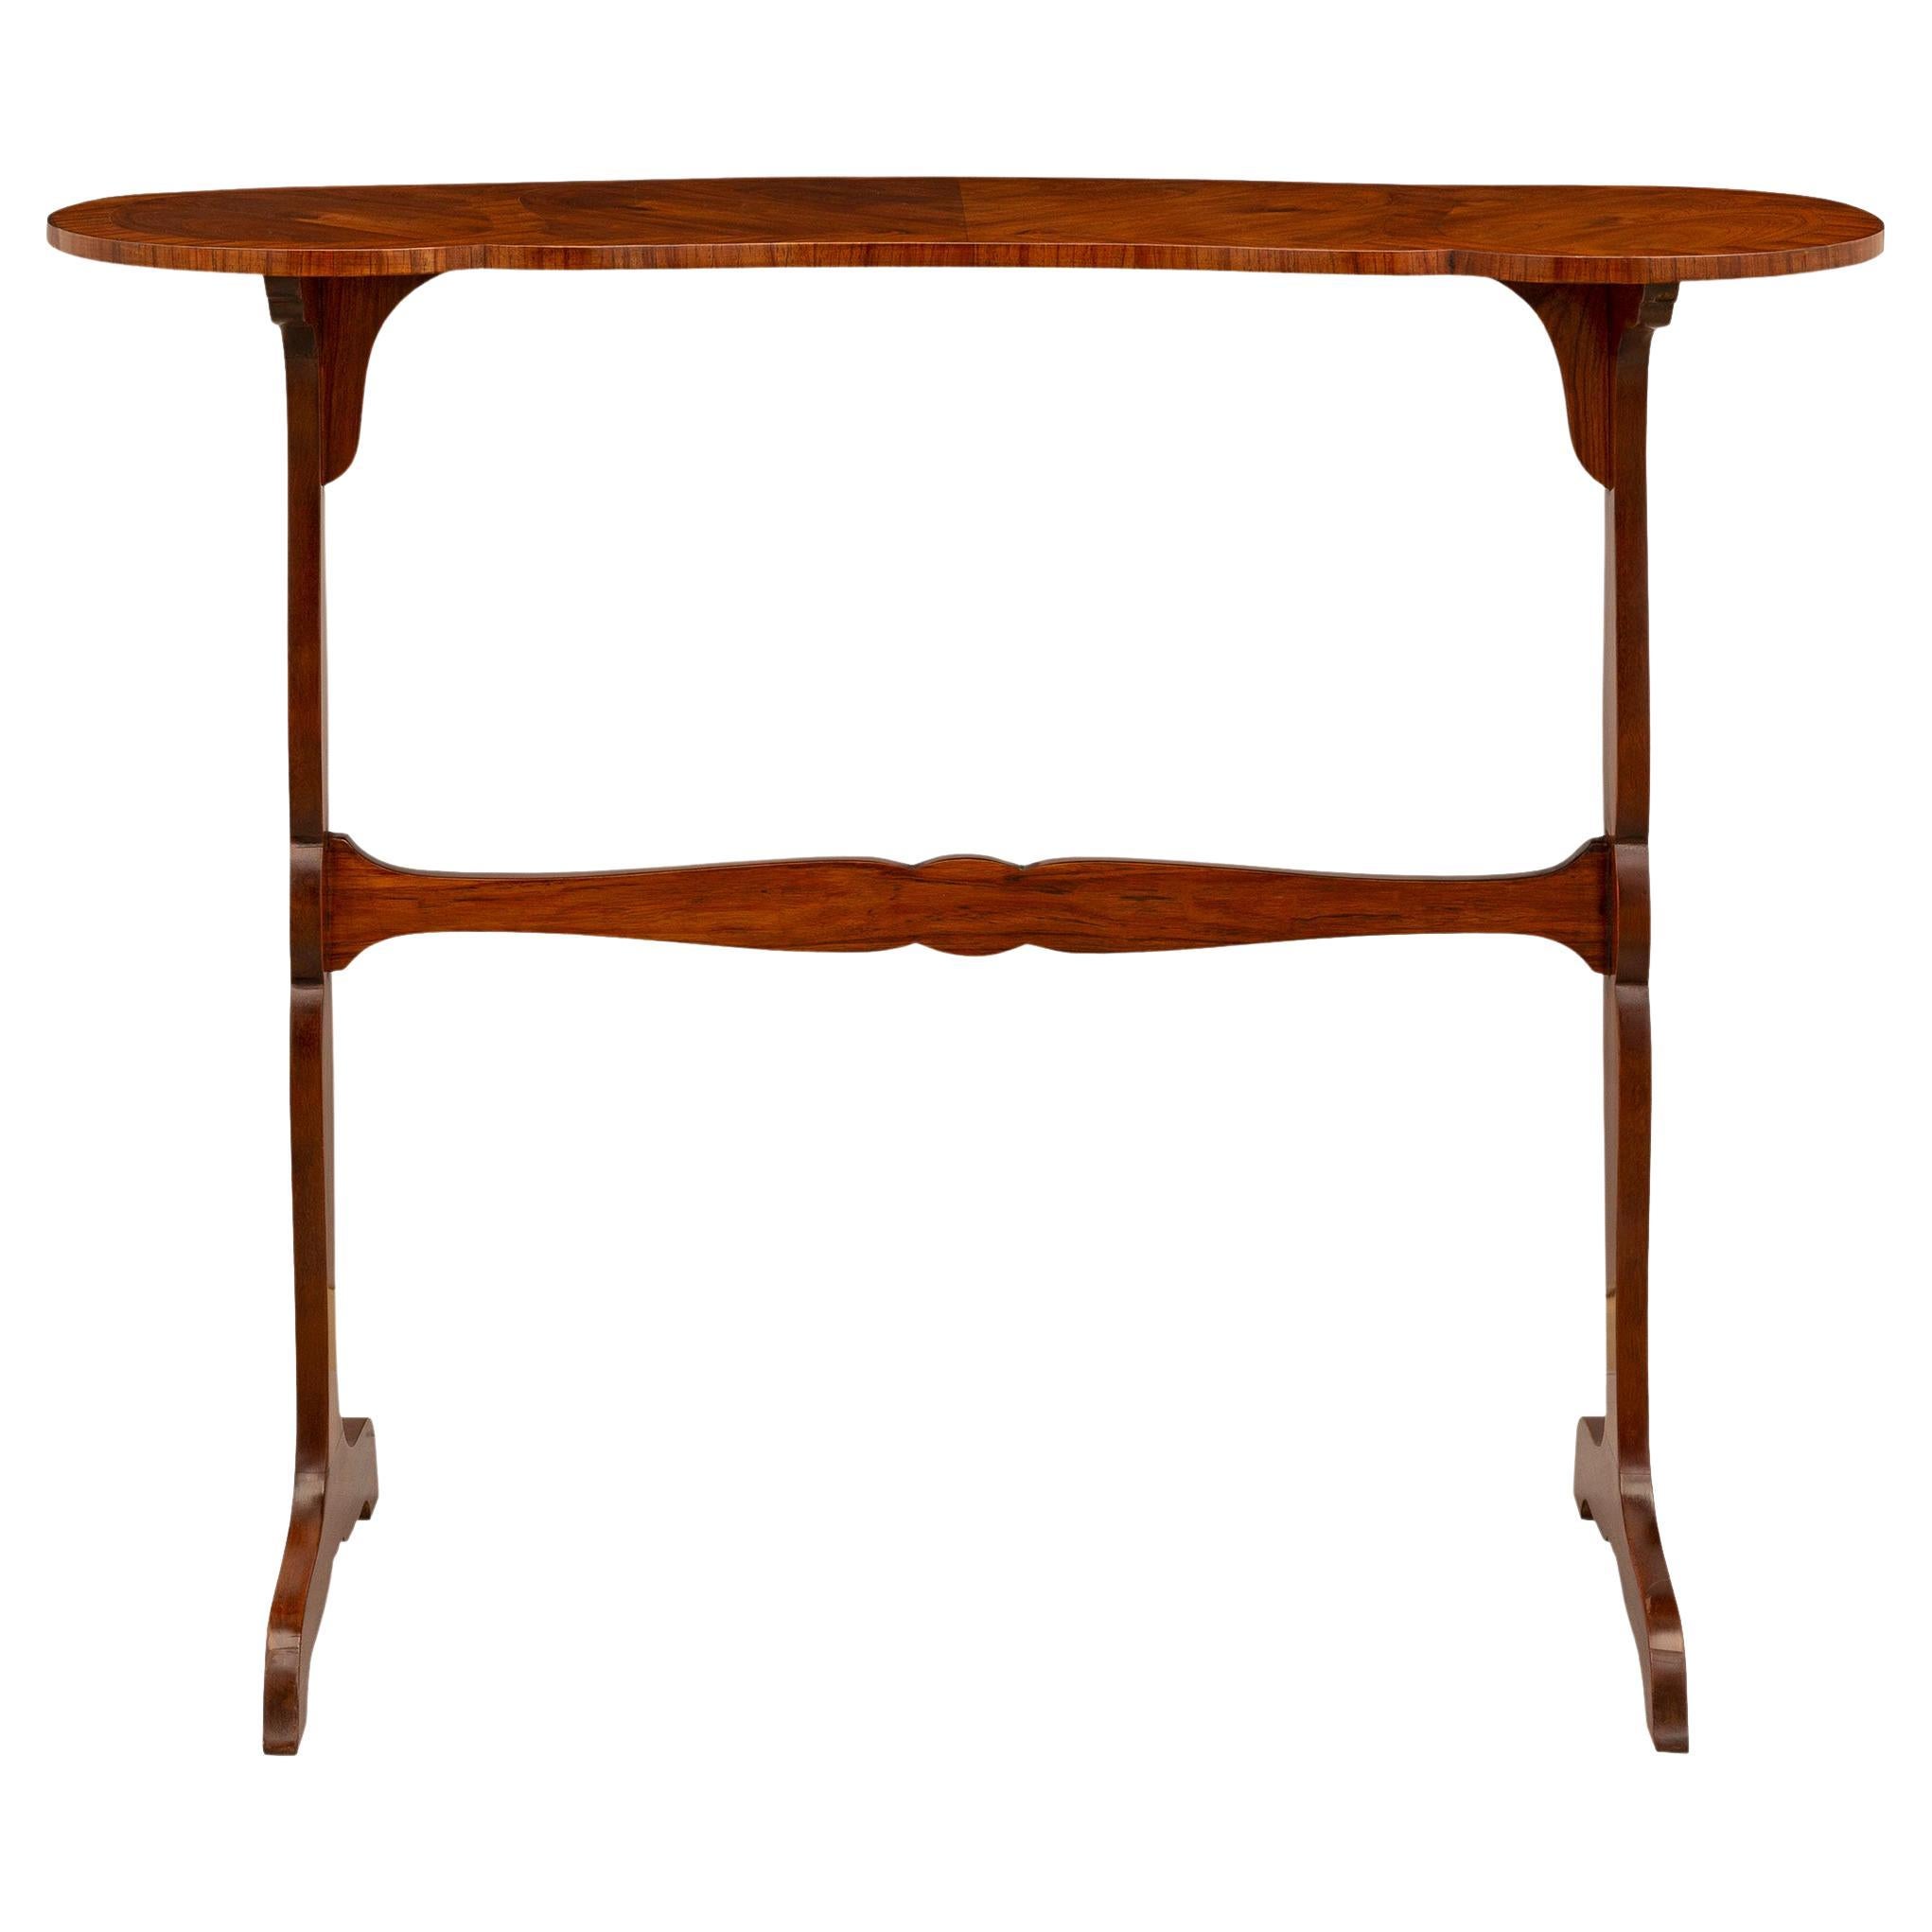 French 19th Century Louis XV Style Tulipwood Kidney Shape Table